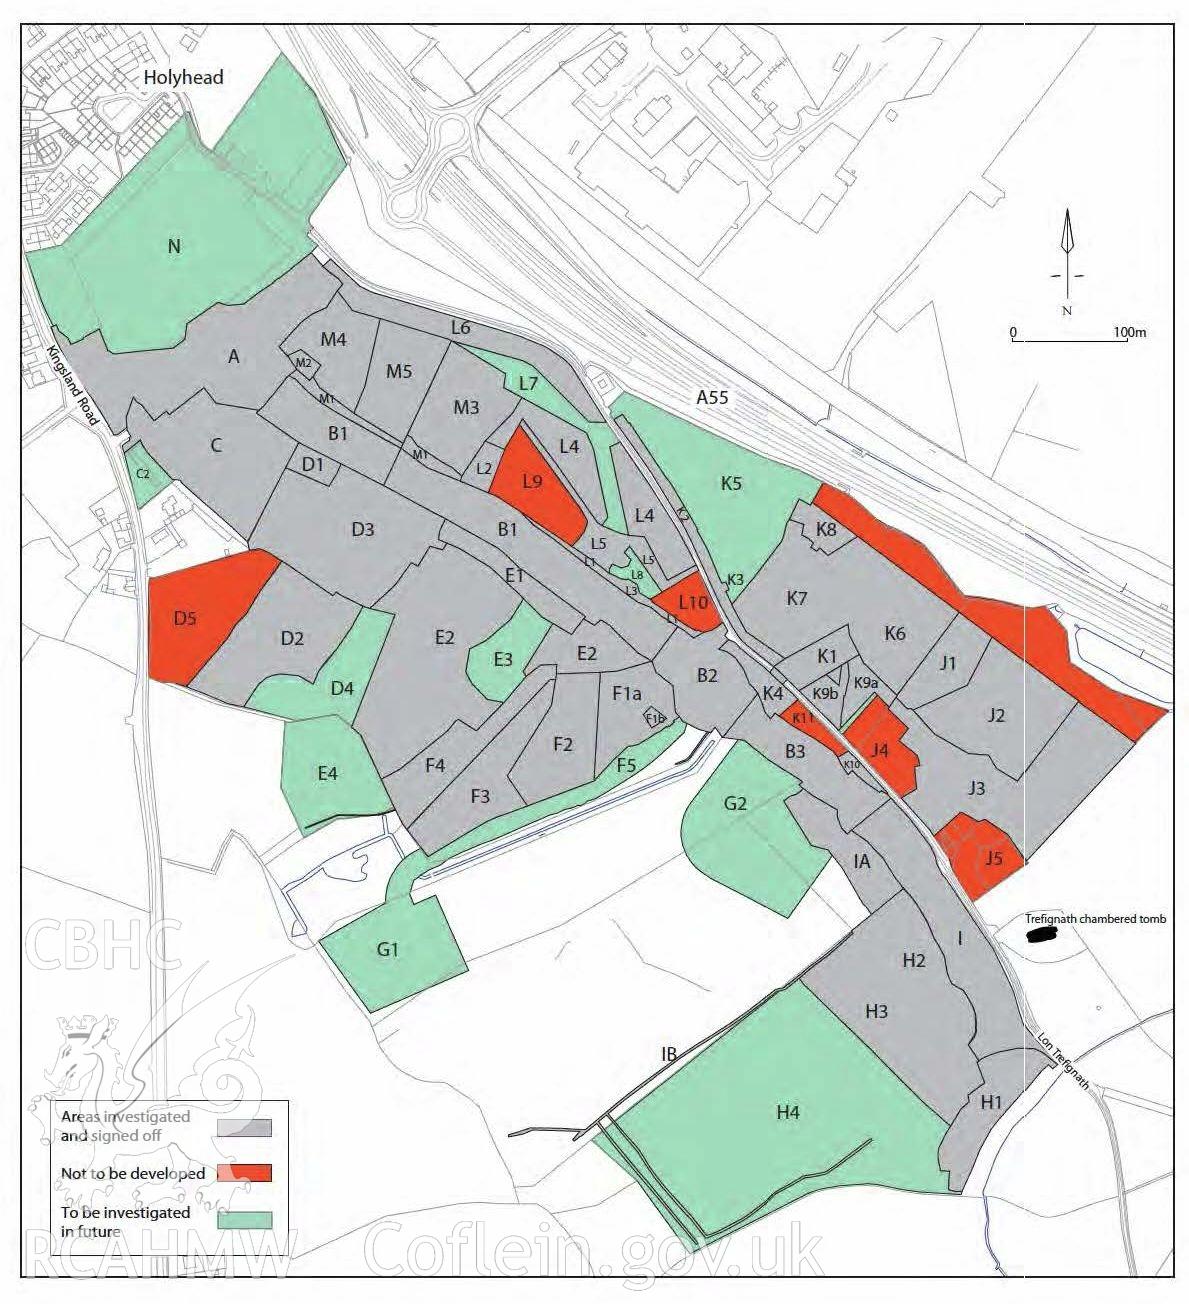 Plan of previous archaeological work undertaken at Parc Cybi Enterprise Zone, Holyhead, Anglesey, by area and status. Included in material used as part of Archaeology Wales' heritage impact assessment of the site, conducted in 2017. Project number: P2522.